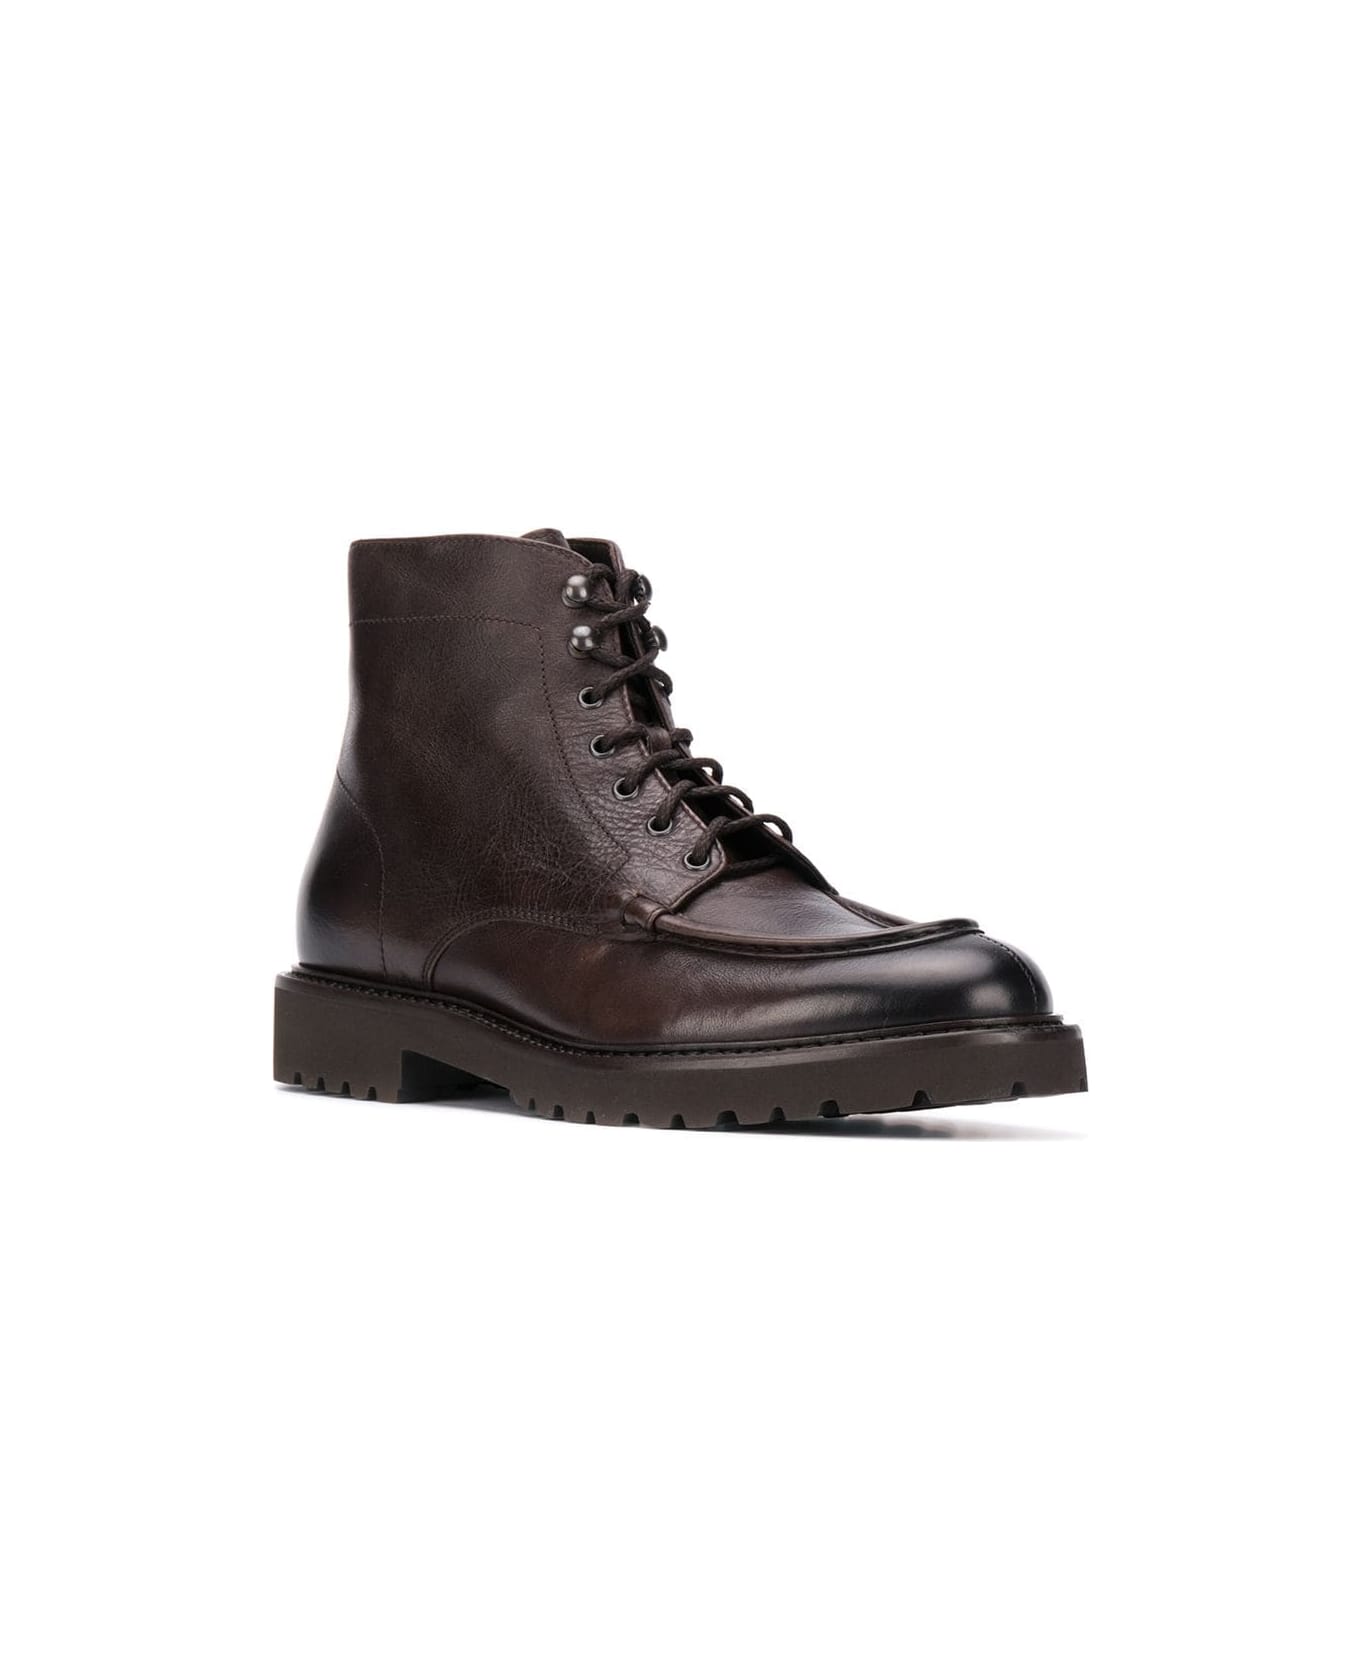 Doucal's Triumph Broadside Derby Boots - Brown ブーツ